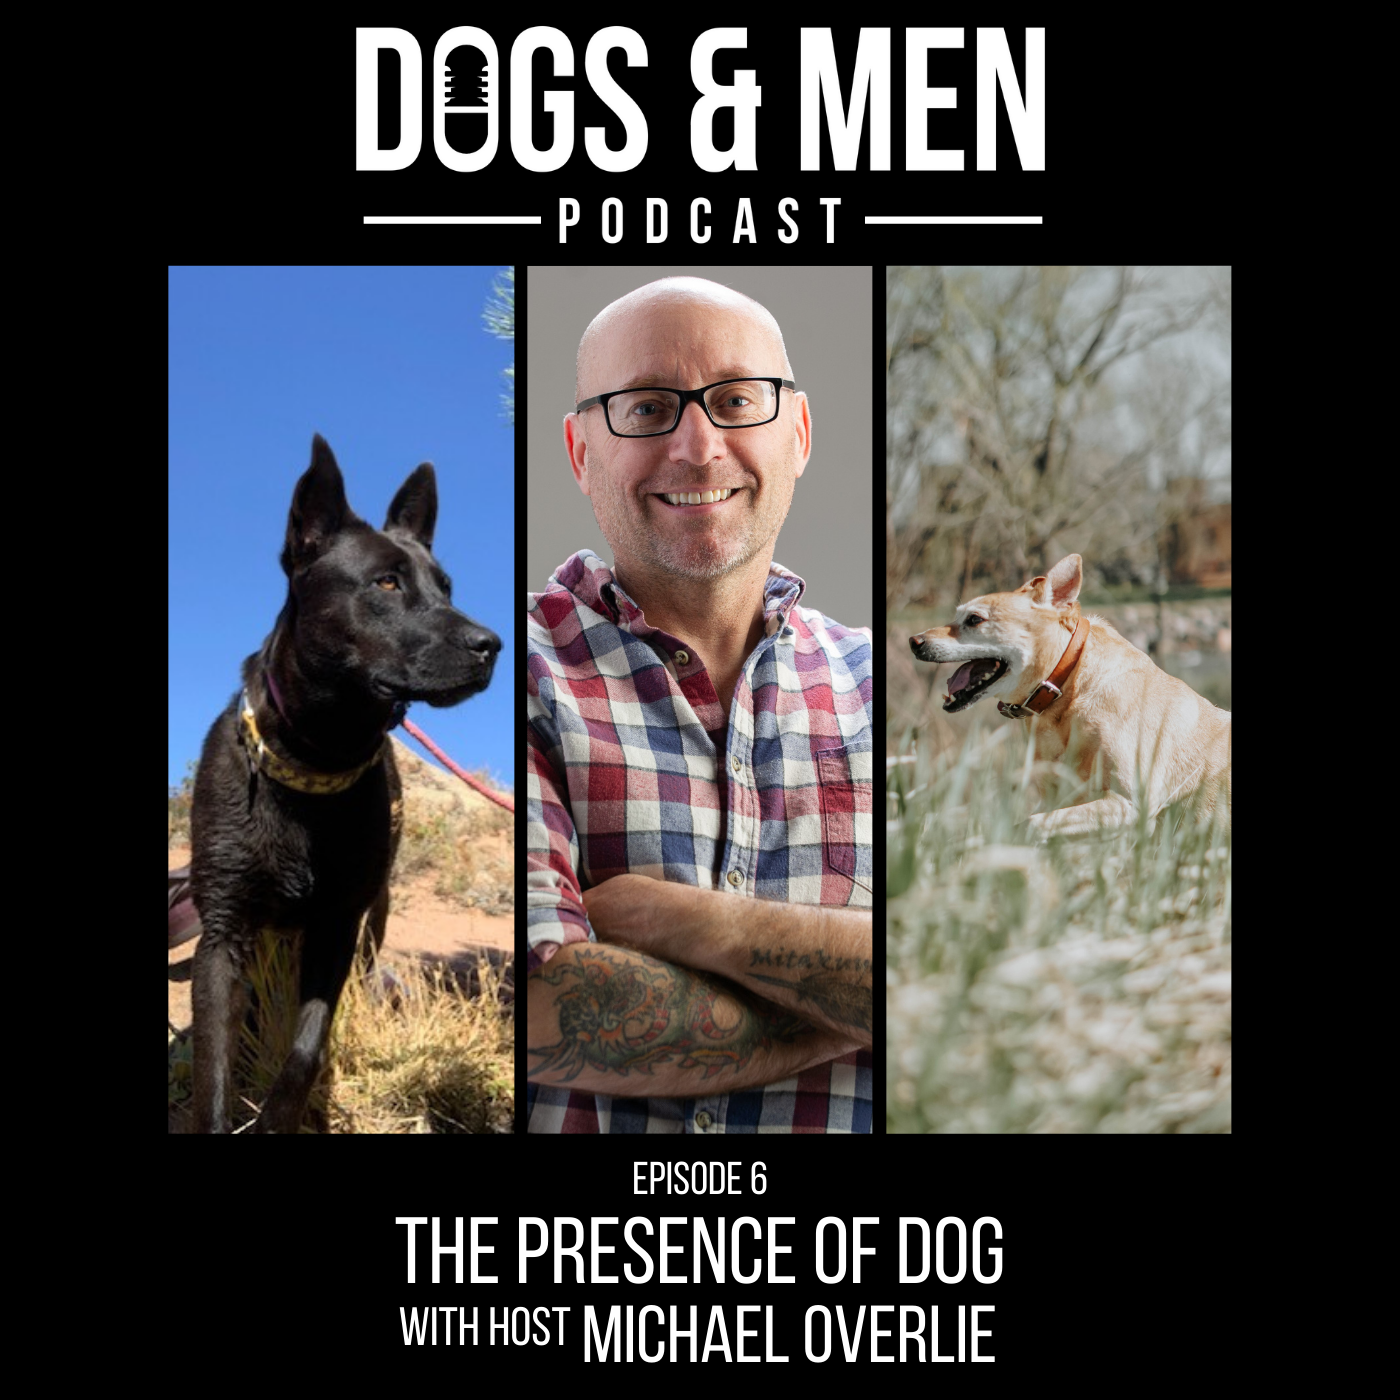 The Presence of Dog